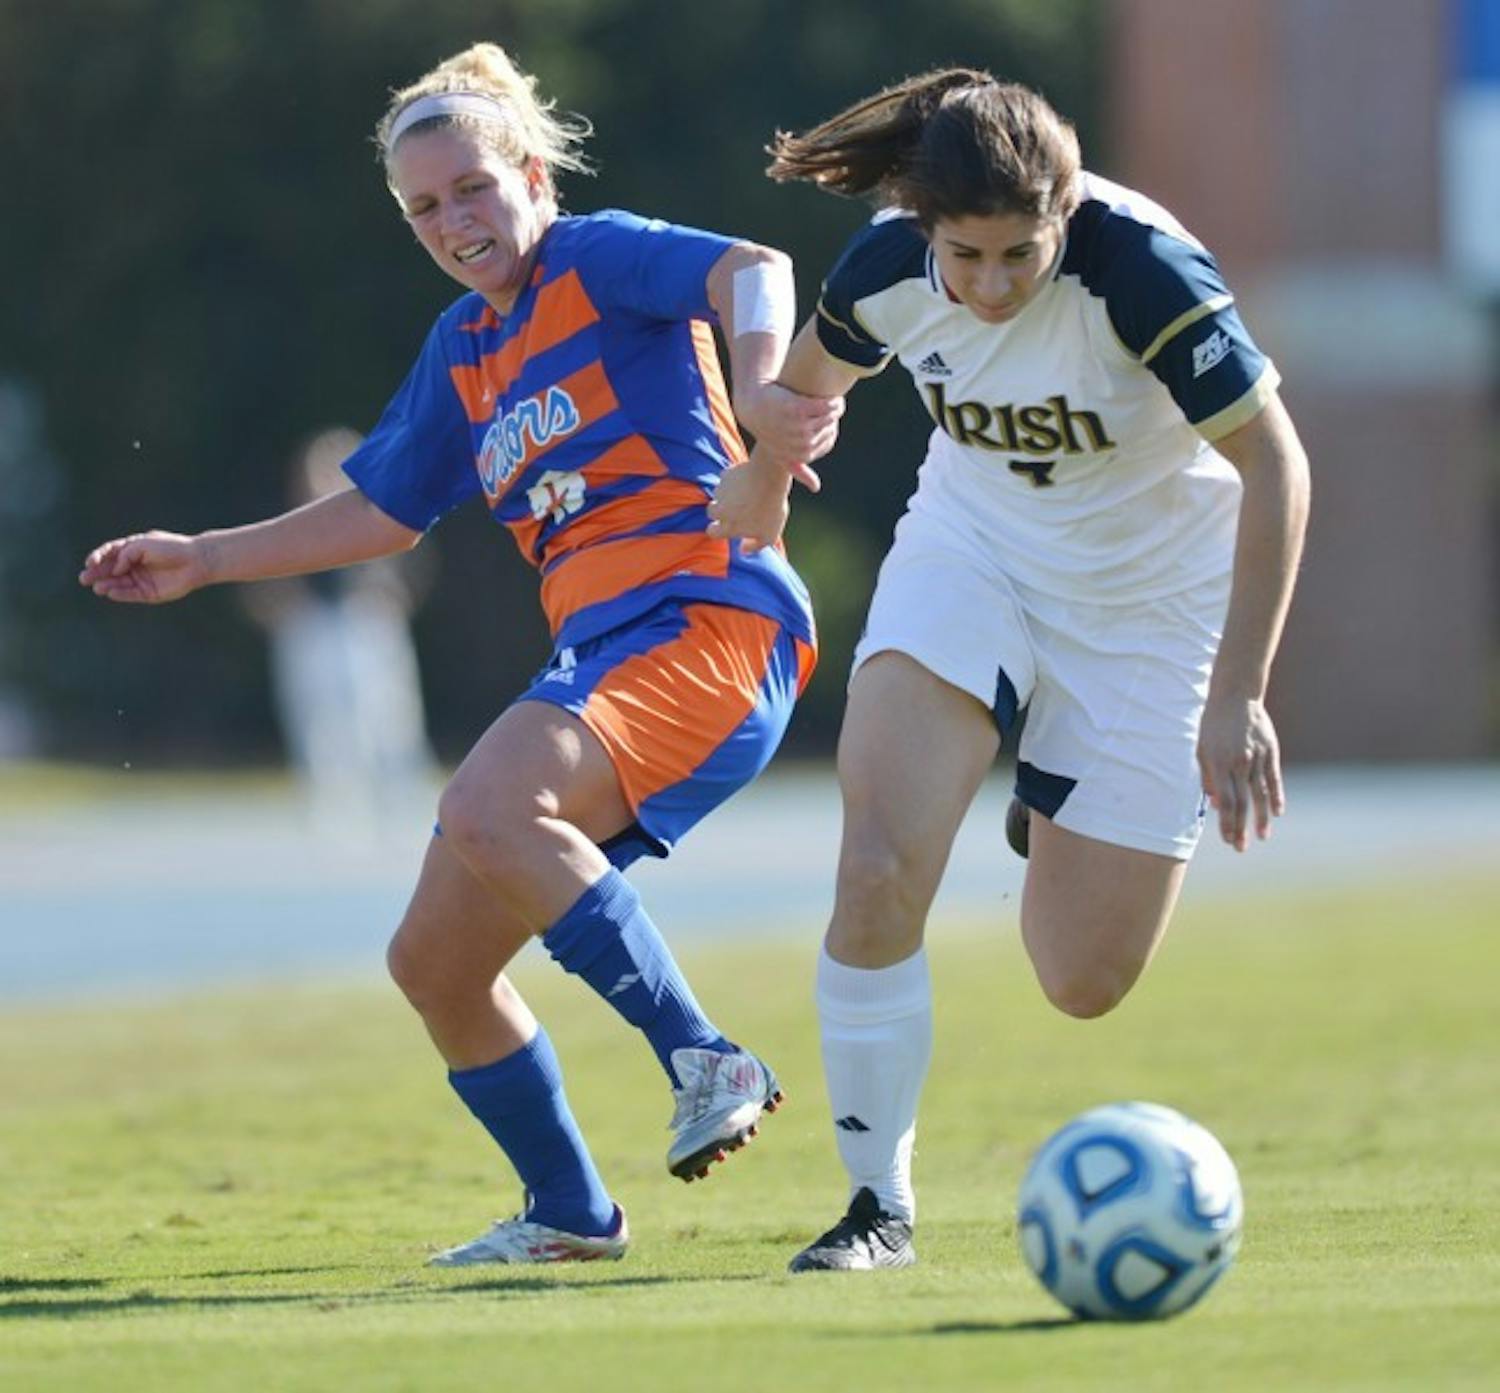 Notre Dame defender Stephanie Campo muscles past Florida defender Tessa Andujar during Florida's 2-0 loss to Notre Dame on Sunday afternoon.